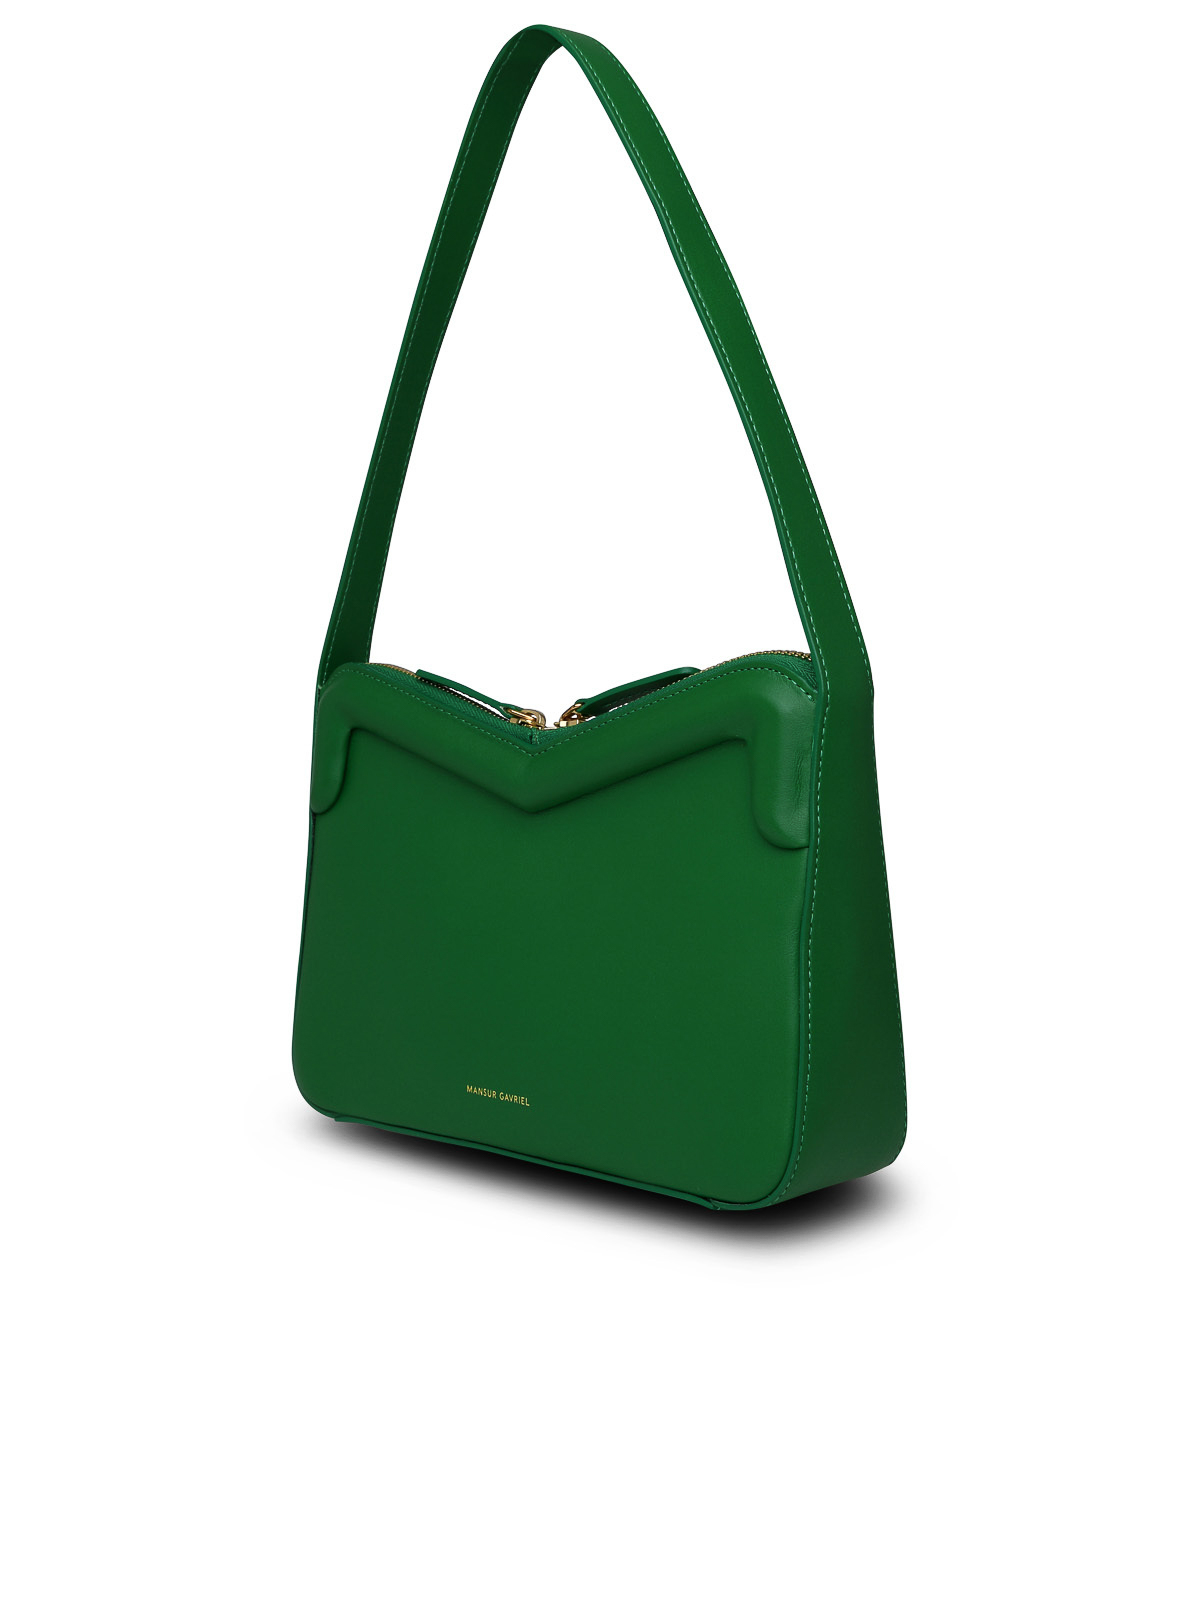 Totes bags Mansur Gavriel - M frame bag in green leather - WS23H070PLGRASS